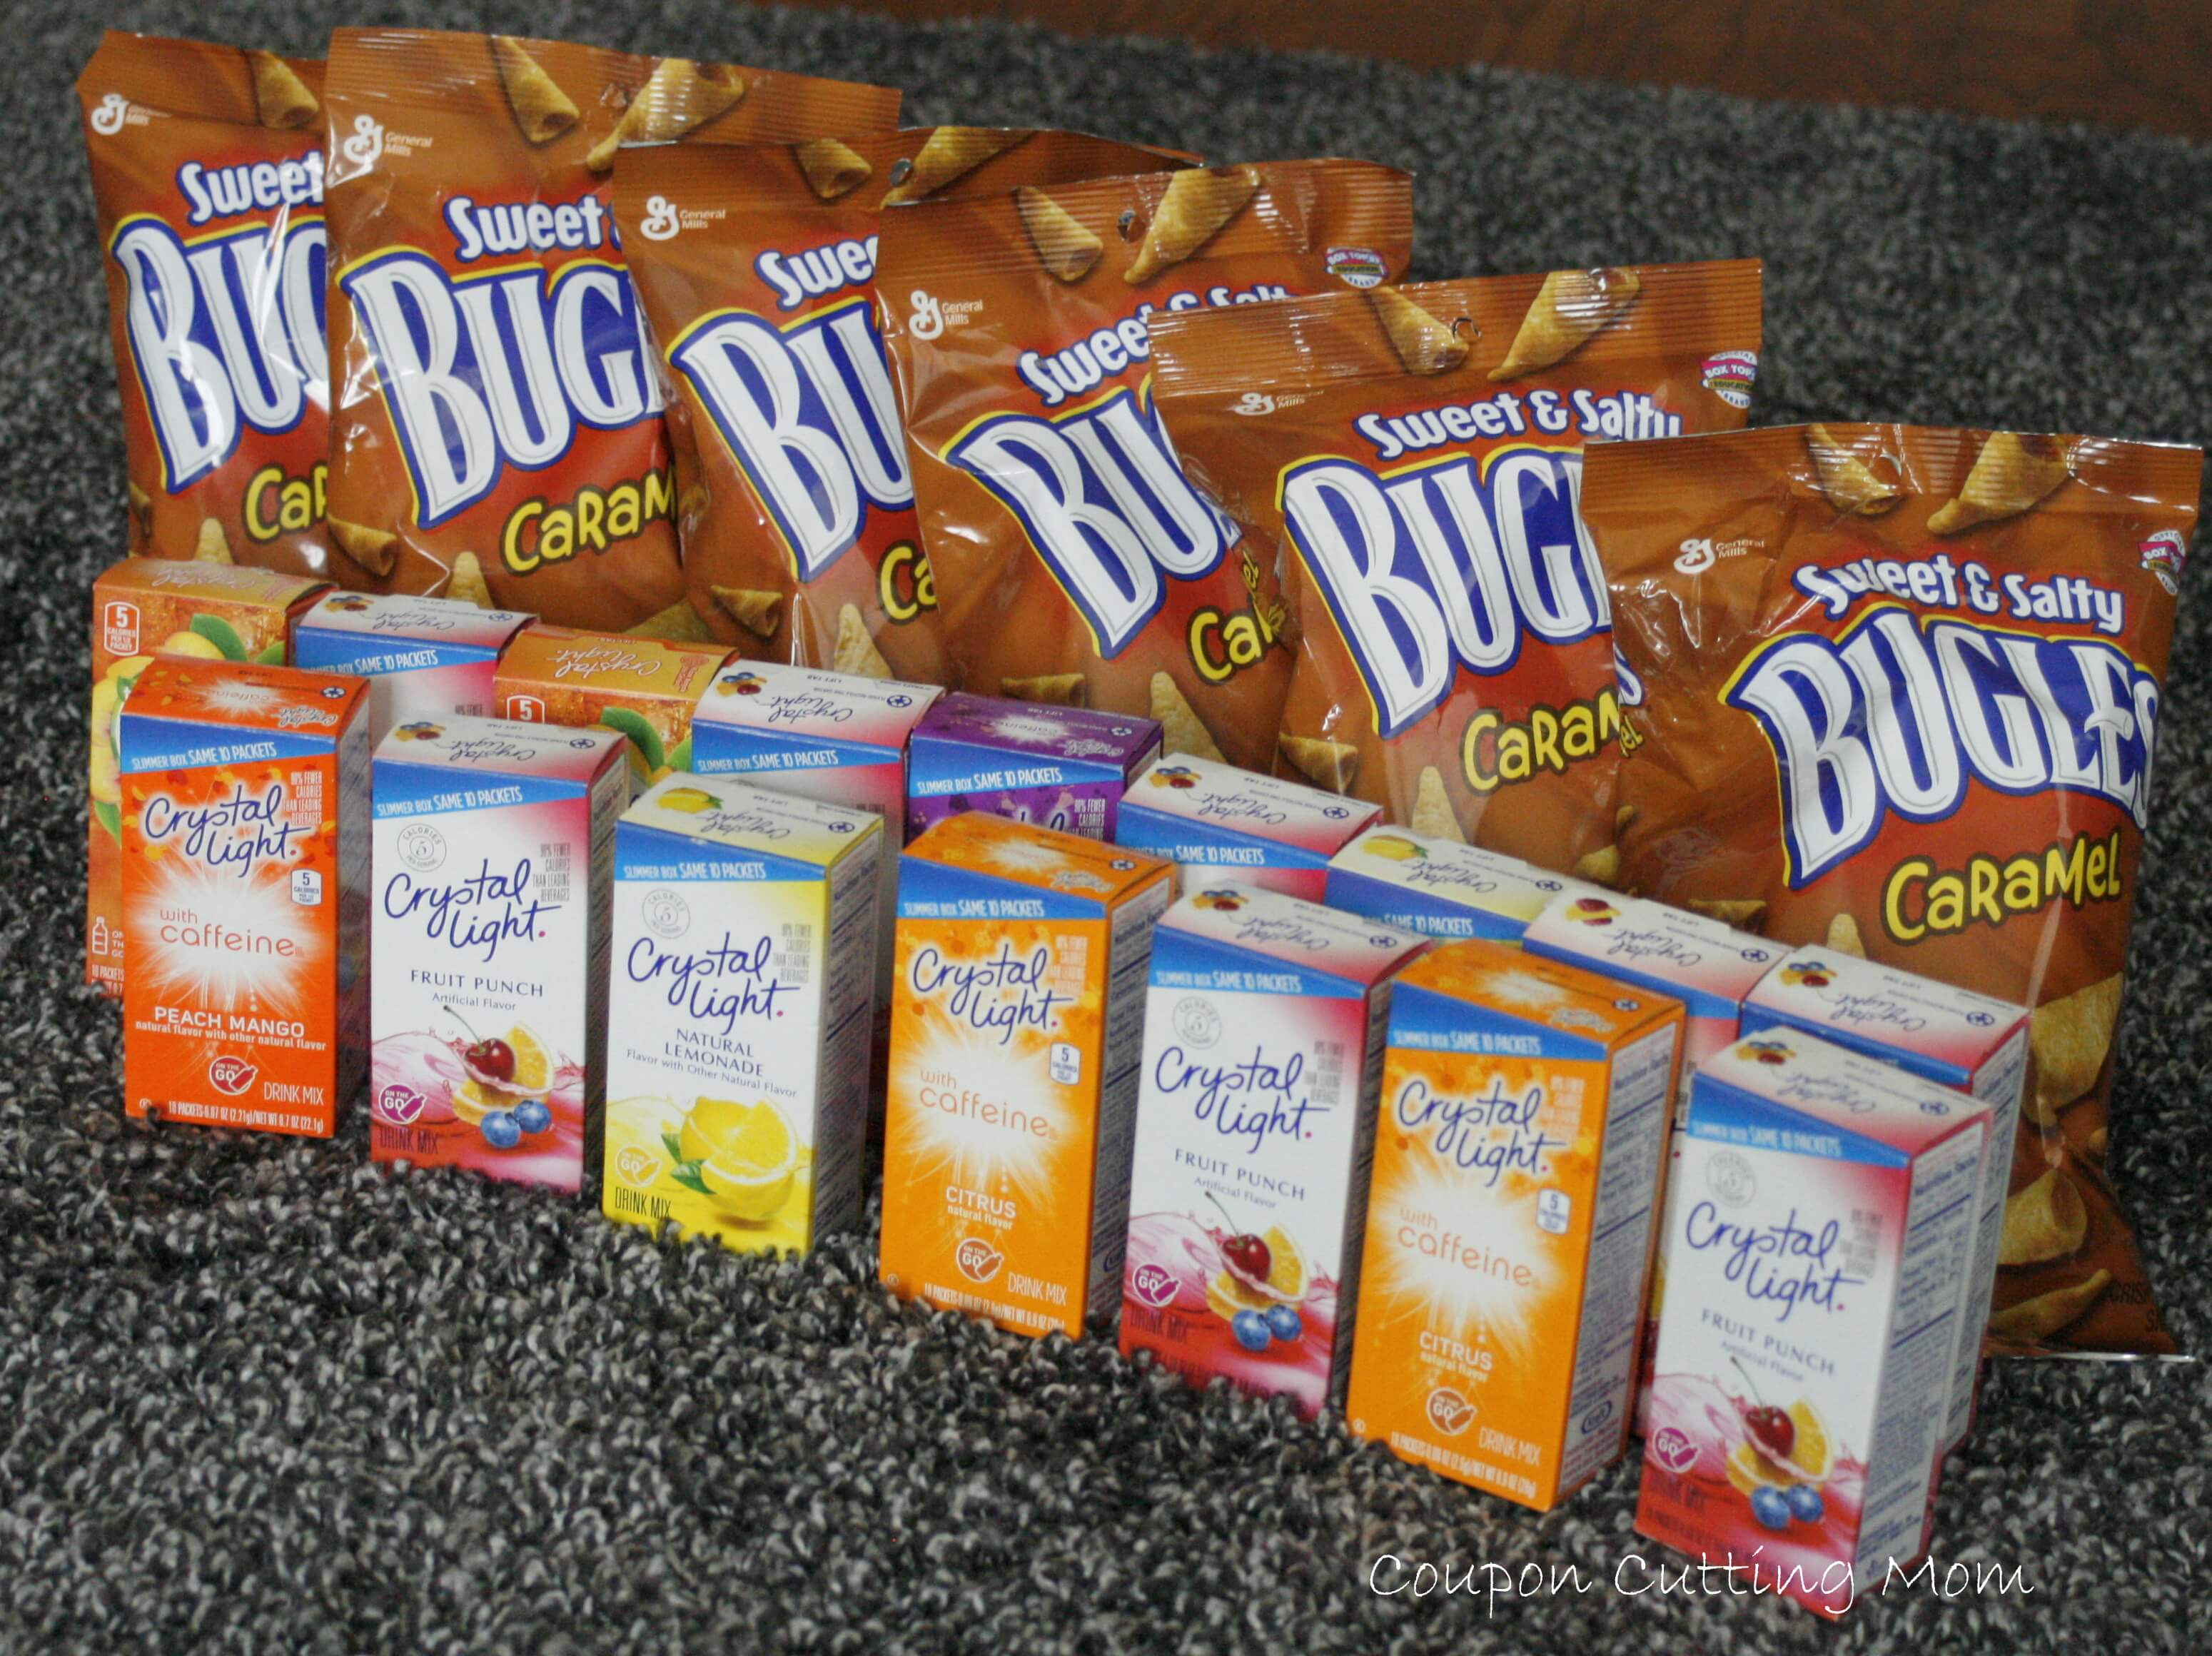 Giant Shopping Trip: $58 Worth of Bugles and Crystal Light ONLY $0.50